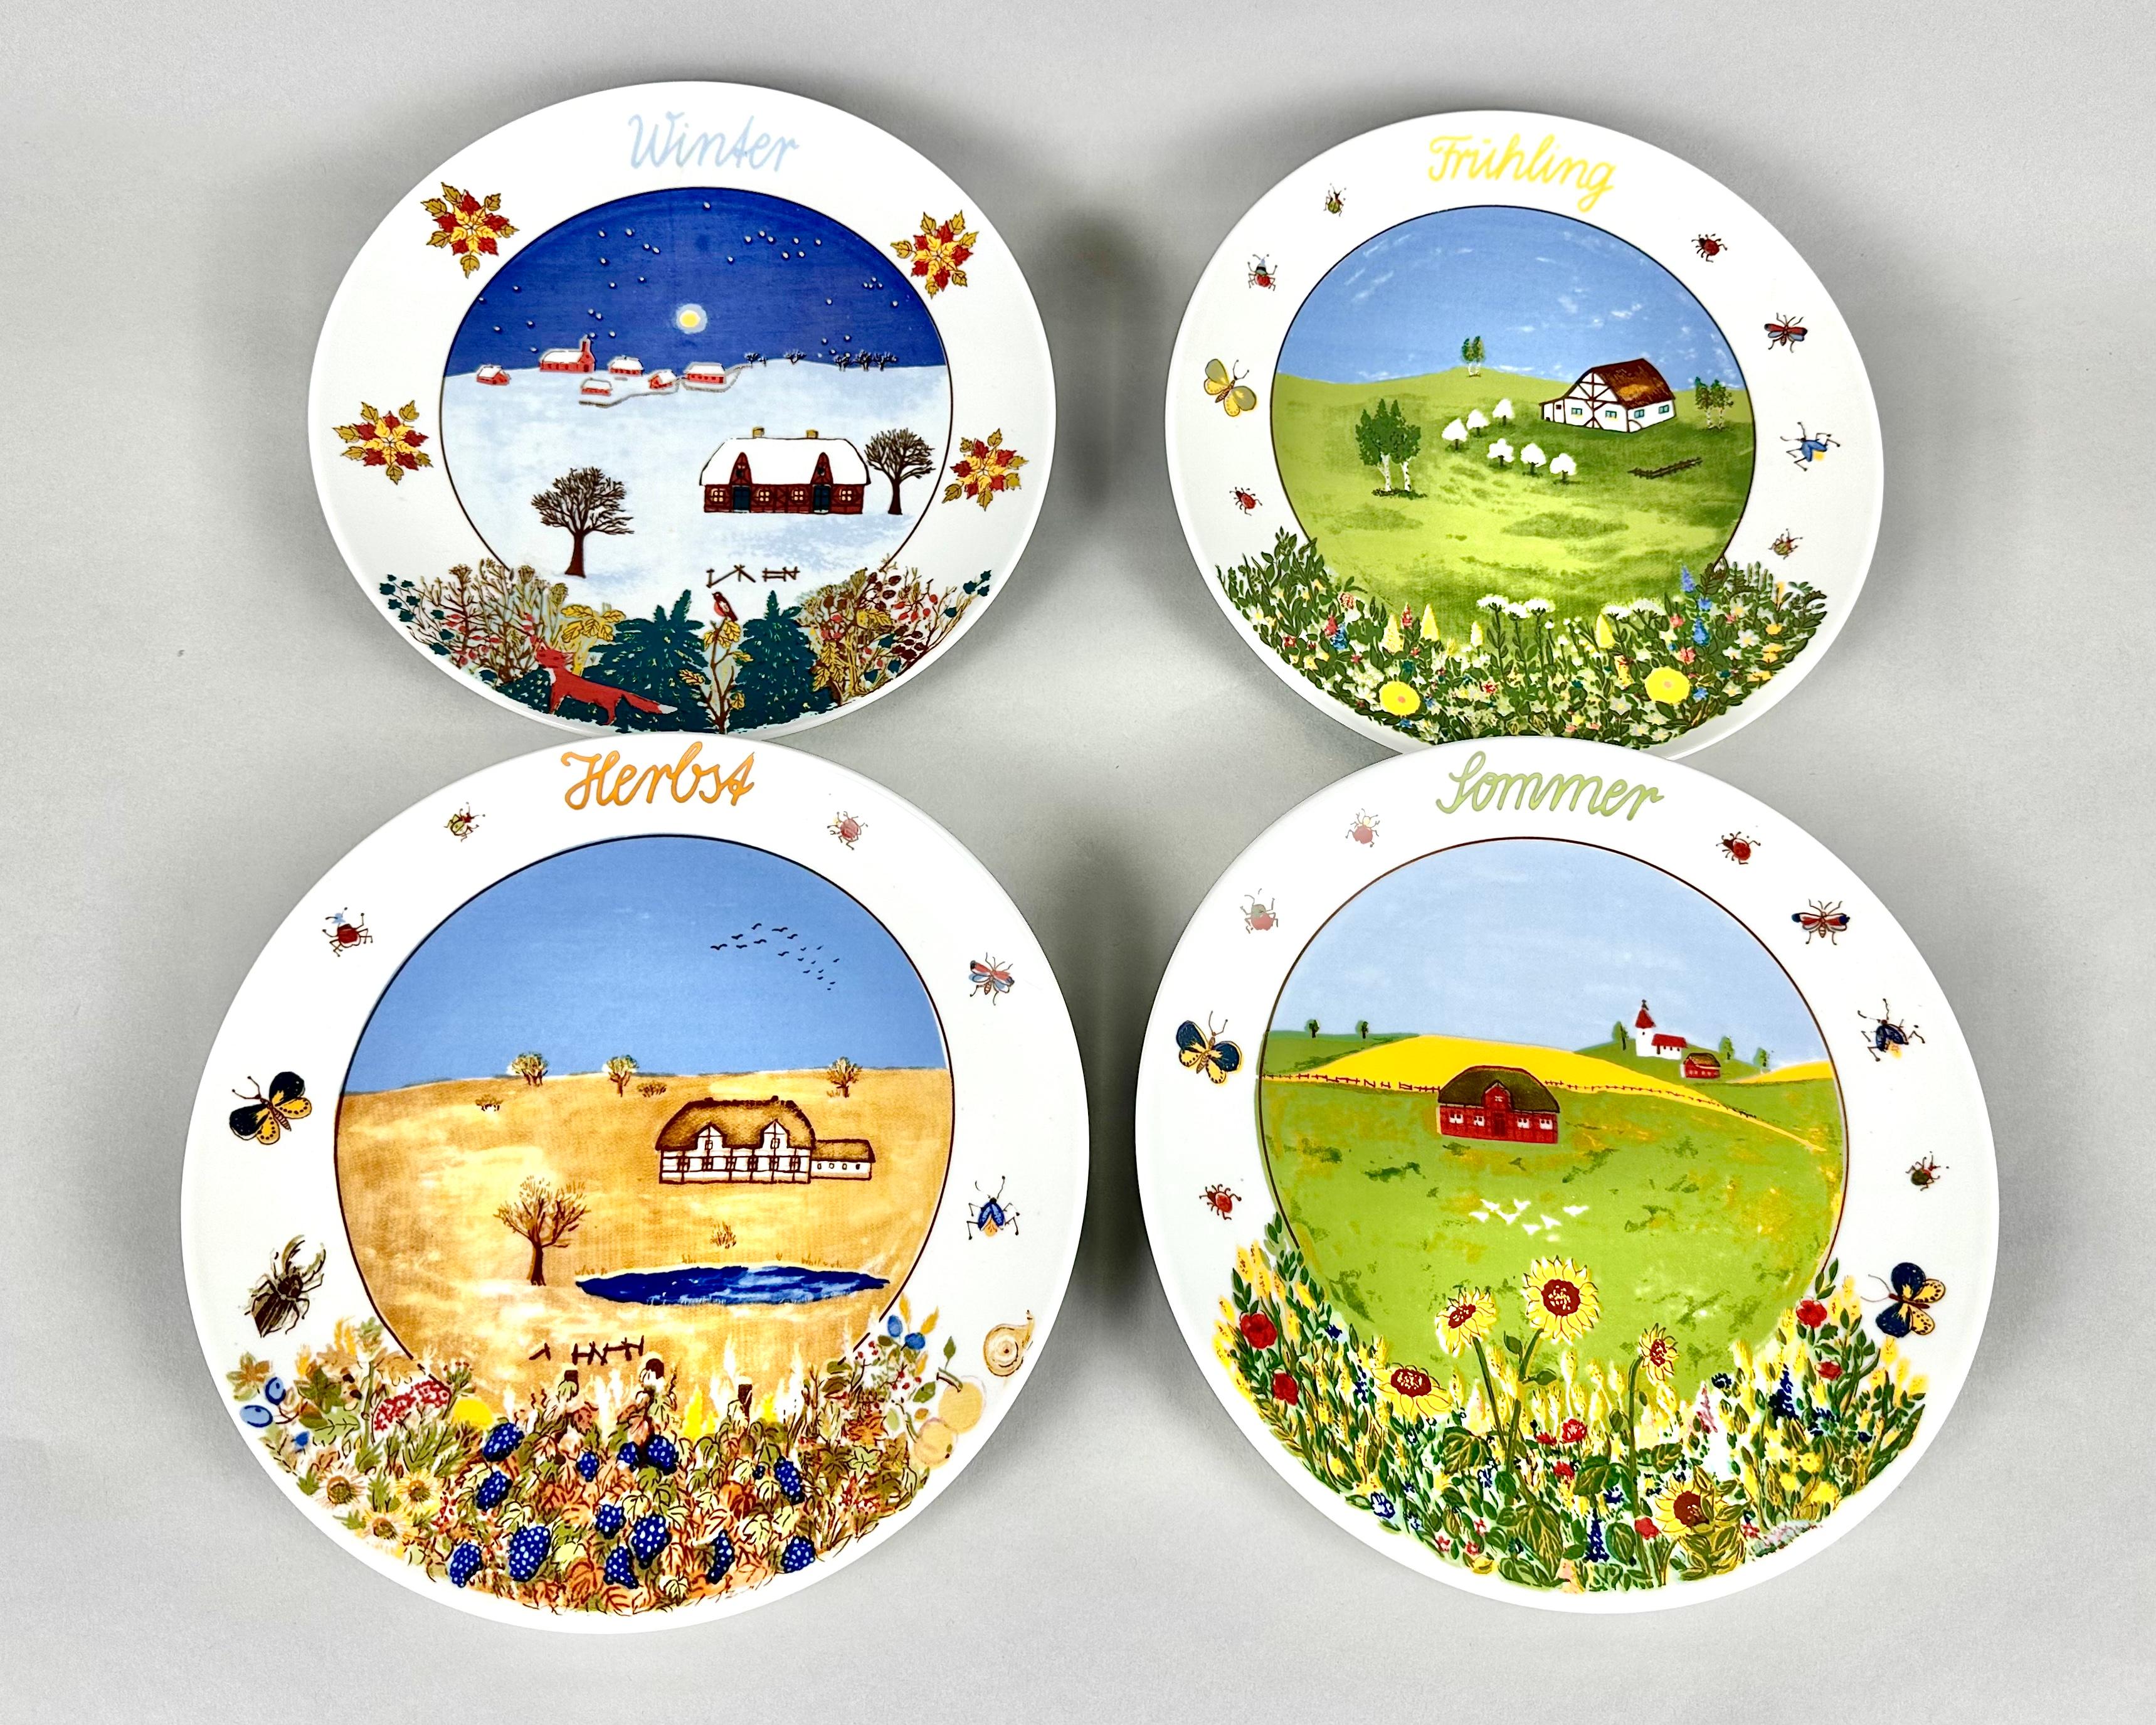 This is a rare and very beautiful set of 4 wall hanging plates/ panels by Kahla.

Manufactured in GDR, in 1970.  Vintage collector's plates.

On the plates illustrates a different season: Spring, Summer, Fall & Winter.

 Each plate is vibrant in